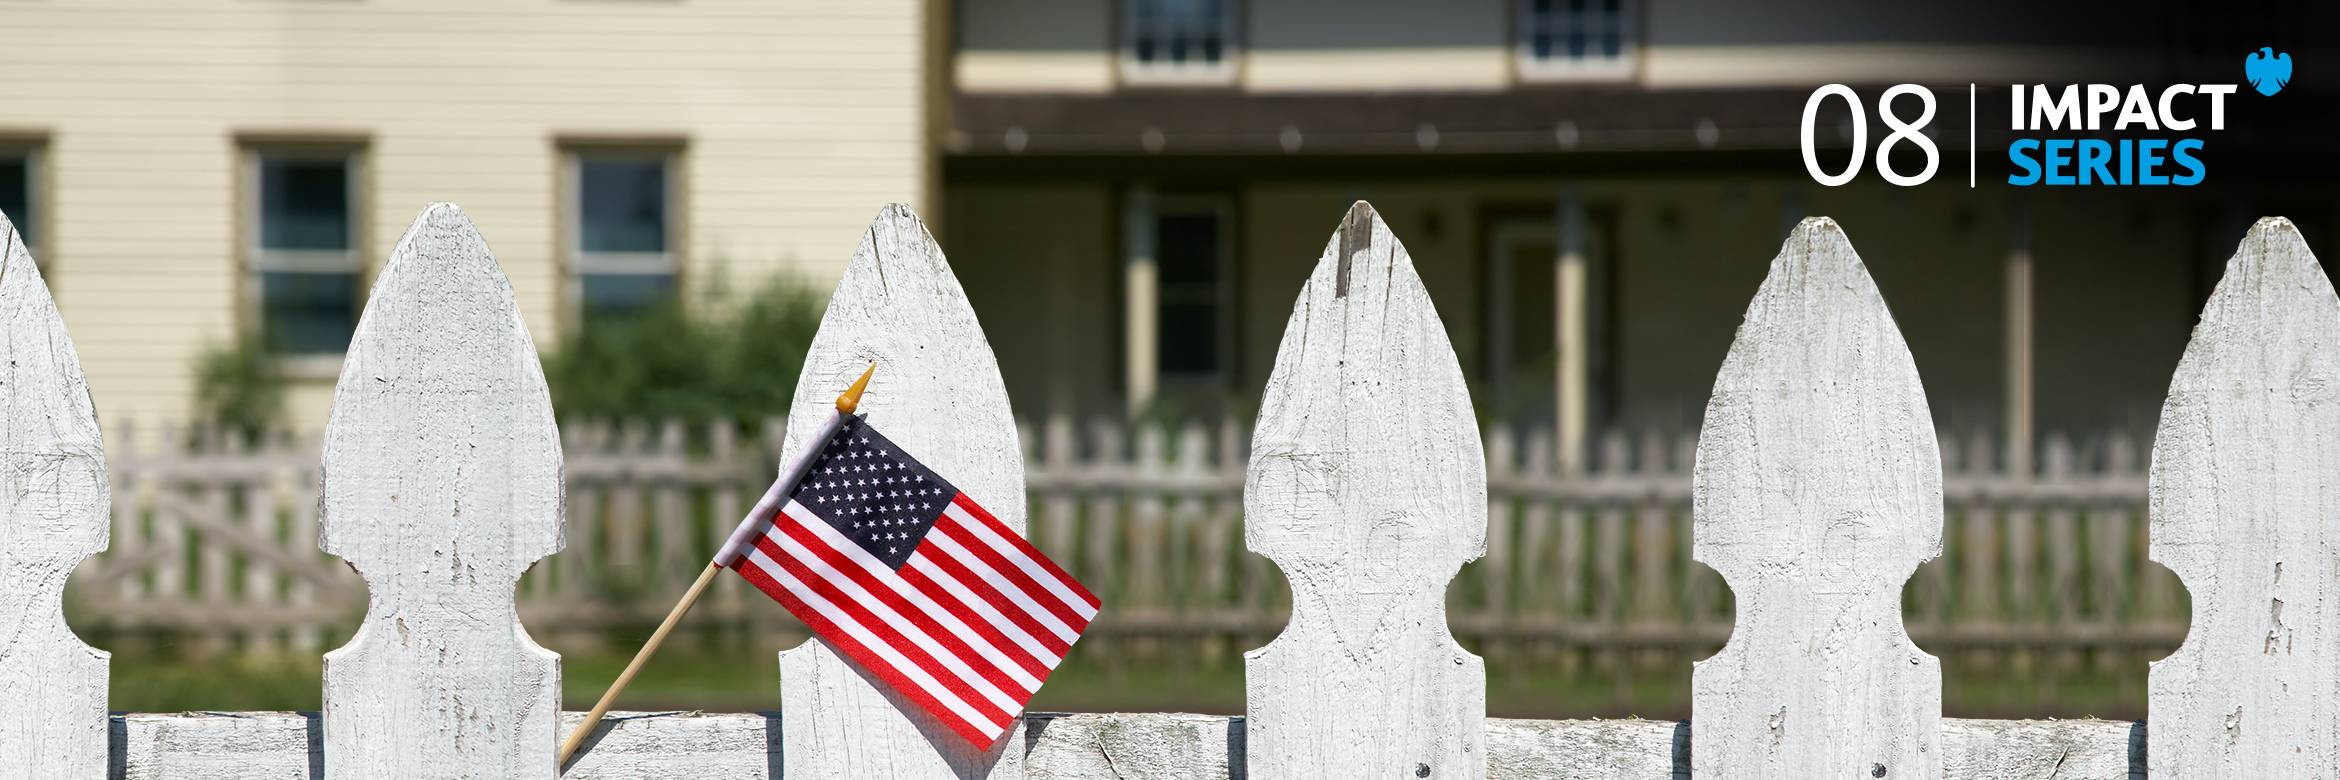 A small American flag hangs from a white picket fence in front of a colonial style home